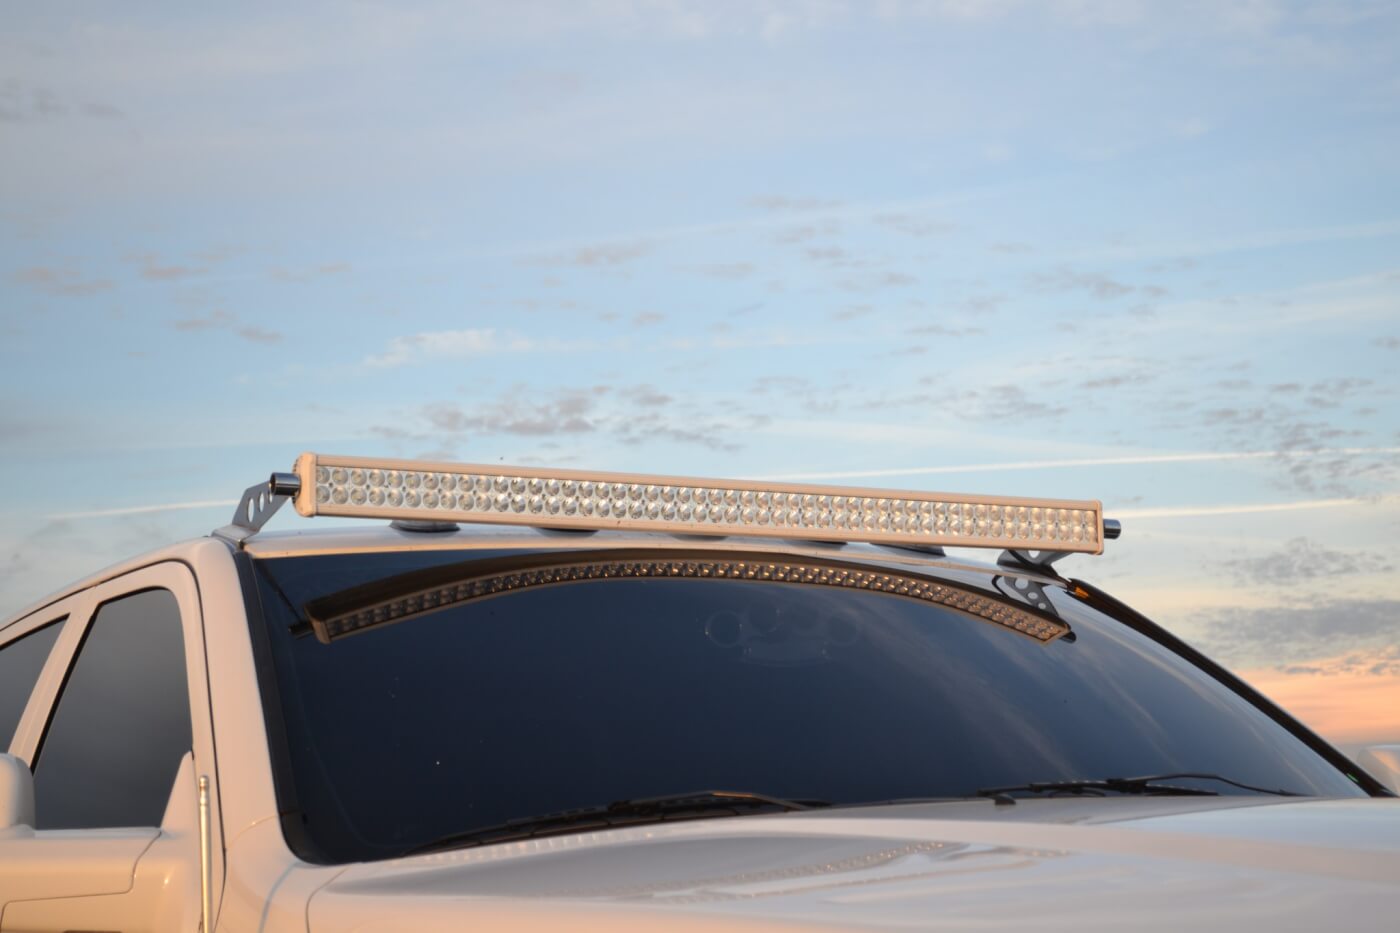 Since Joey heads to the coast on a regular basis, the lights in the grille weren't quite enough lighting when heading out into the dunes at night. To solve this, an additional light bar was mounted up on top of the truck from Rigid Industries.